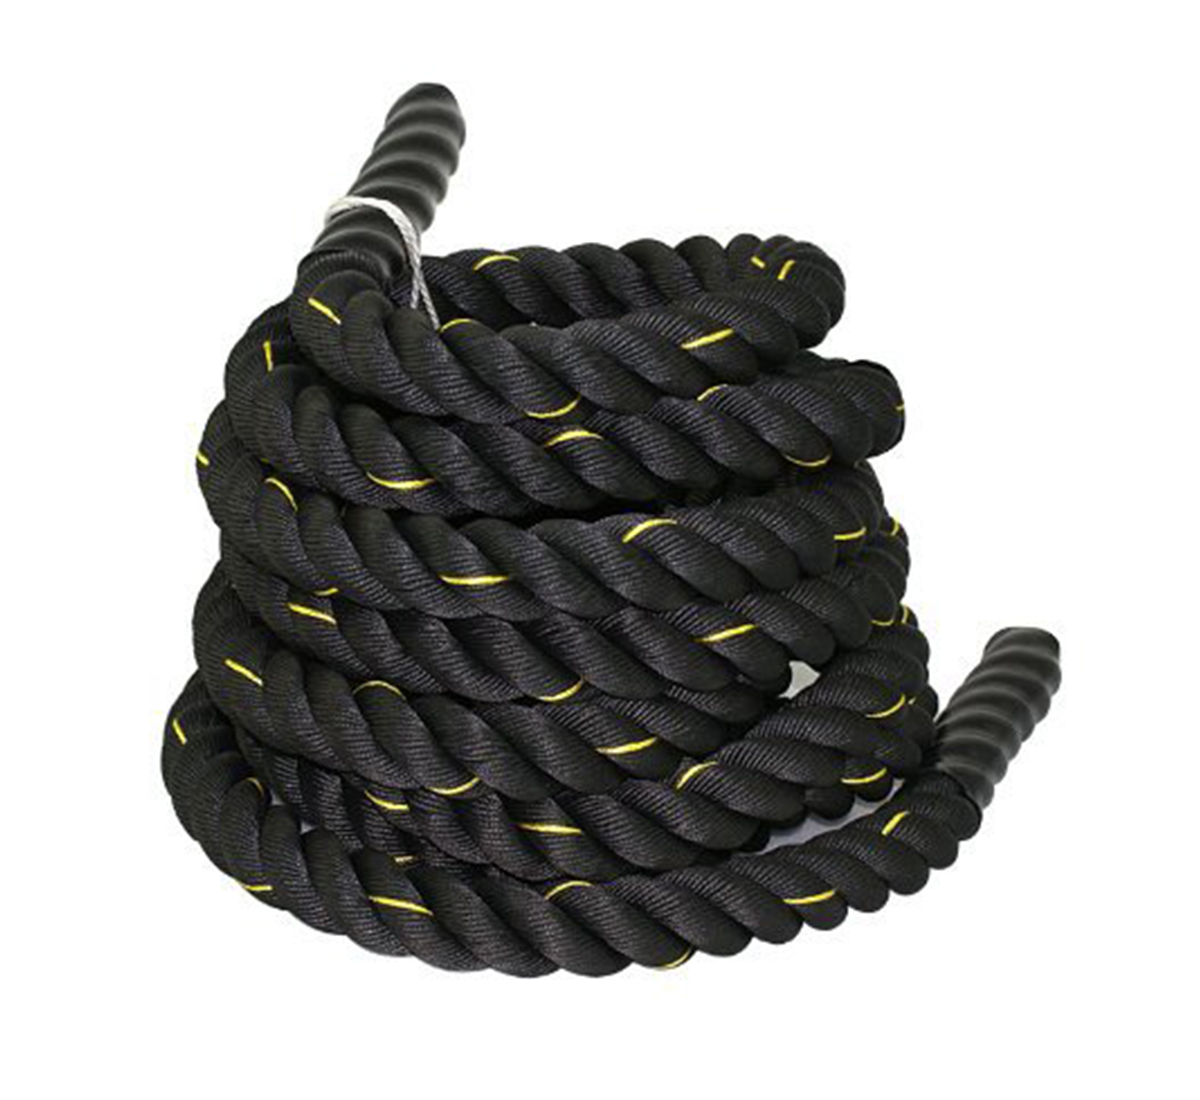 Battle Rope 32mm Thickness Exercise & Fitness Training Equipment-Xij 